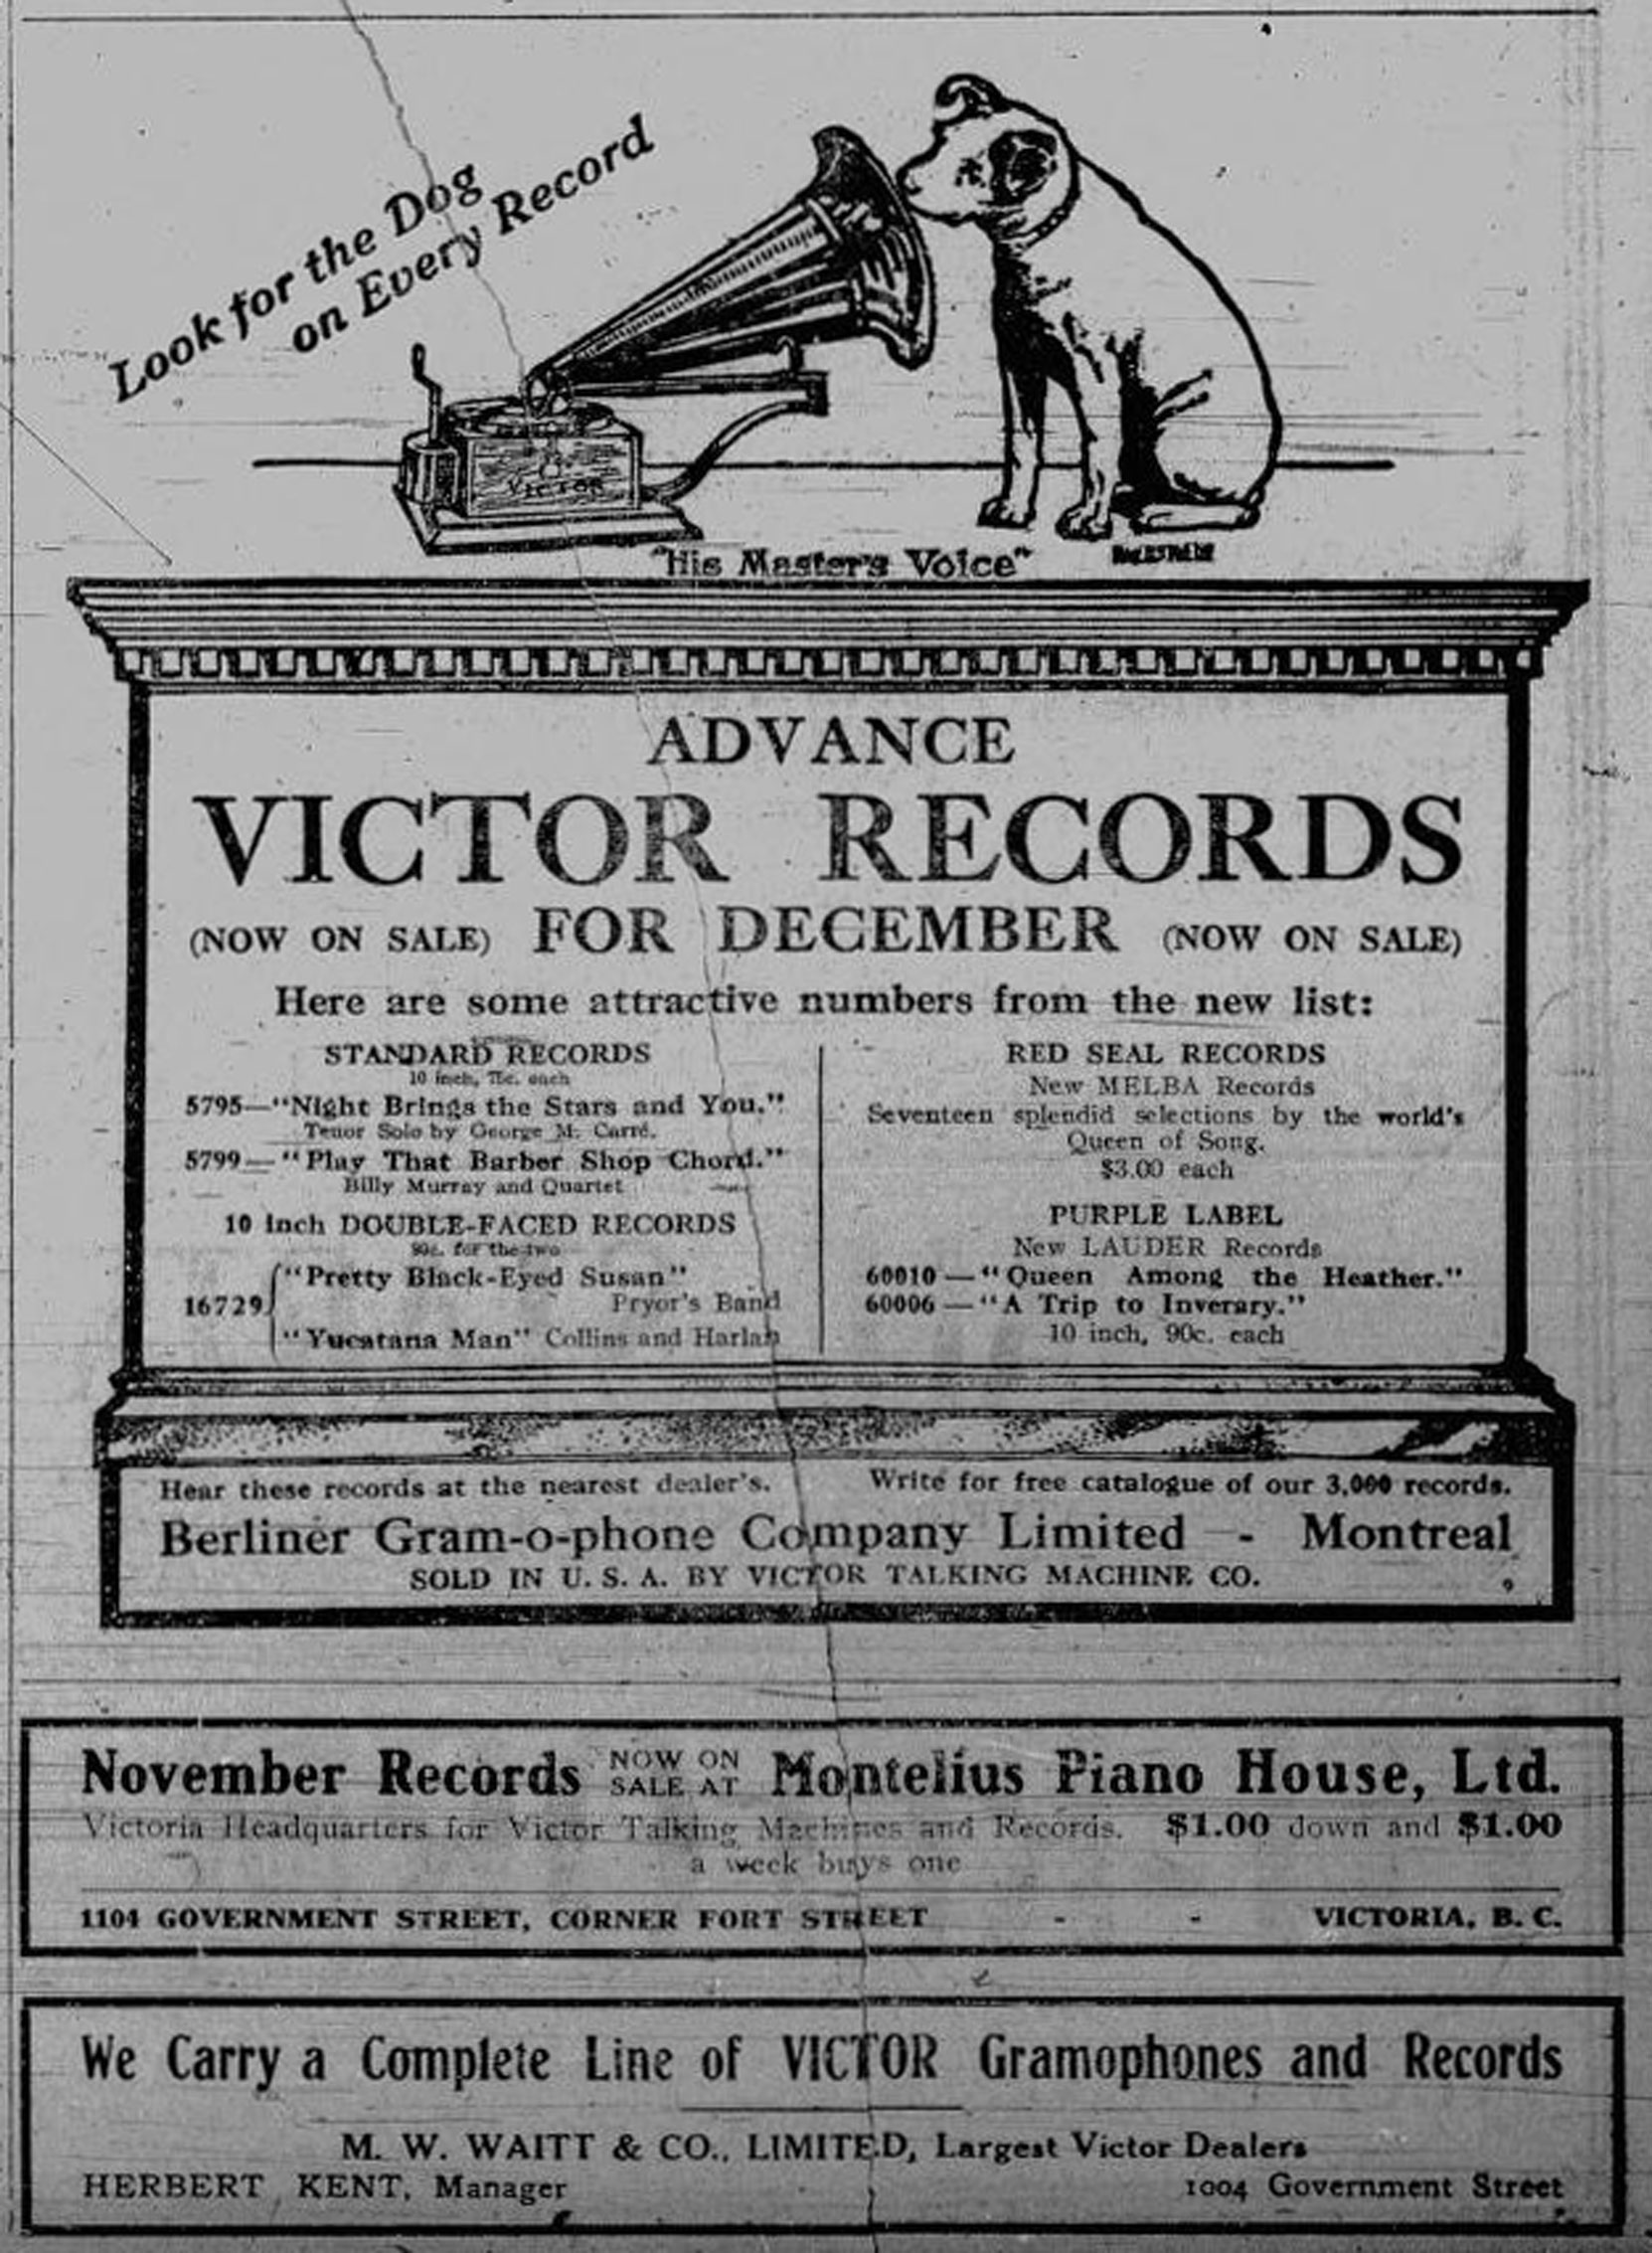 1910 advertisement for Victor Records, sold at 1004 Government Street and 1102 Government Street (Victoria Online Sightseeing Tours collection)